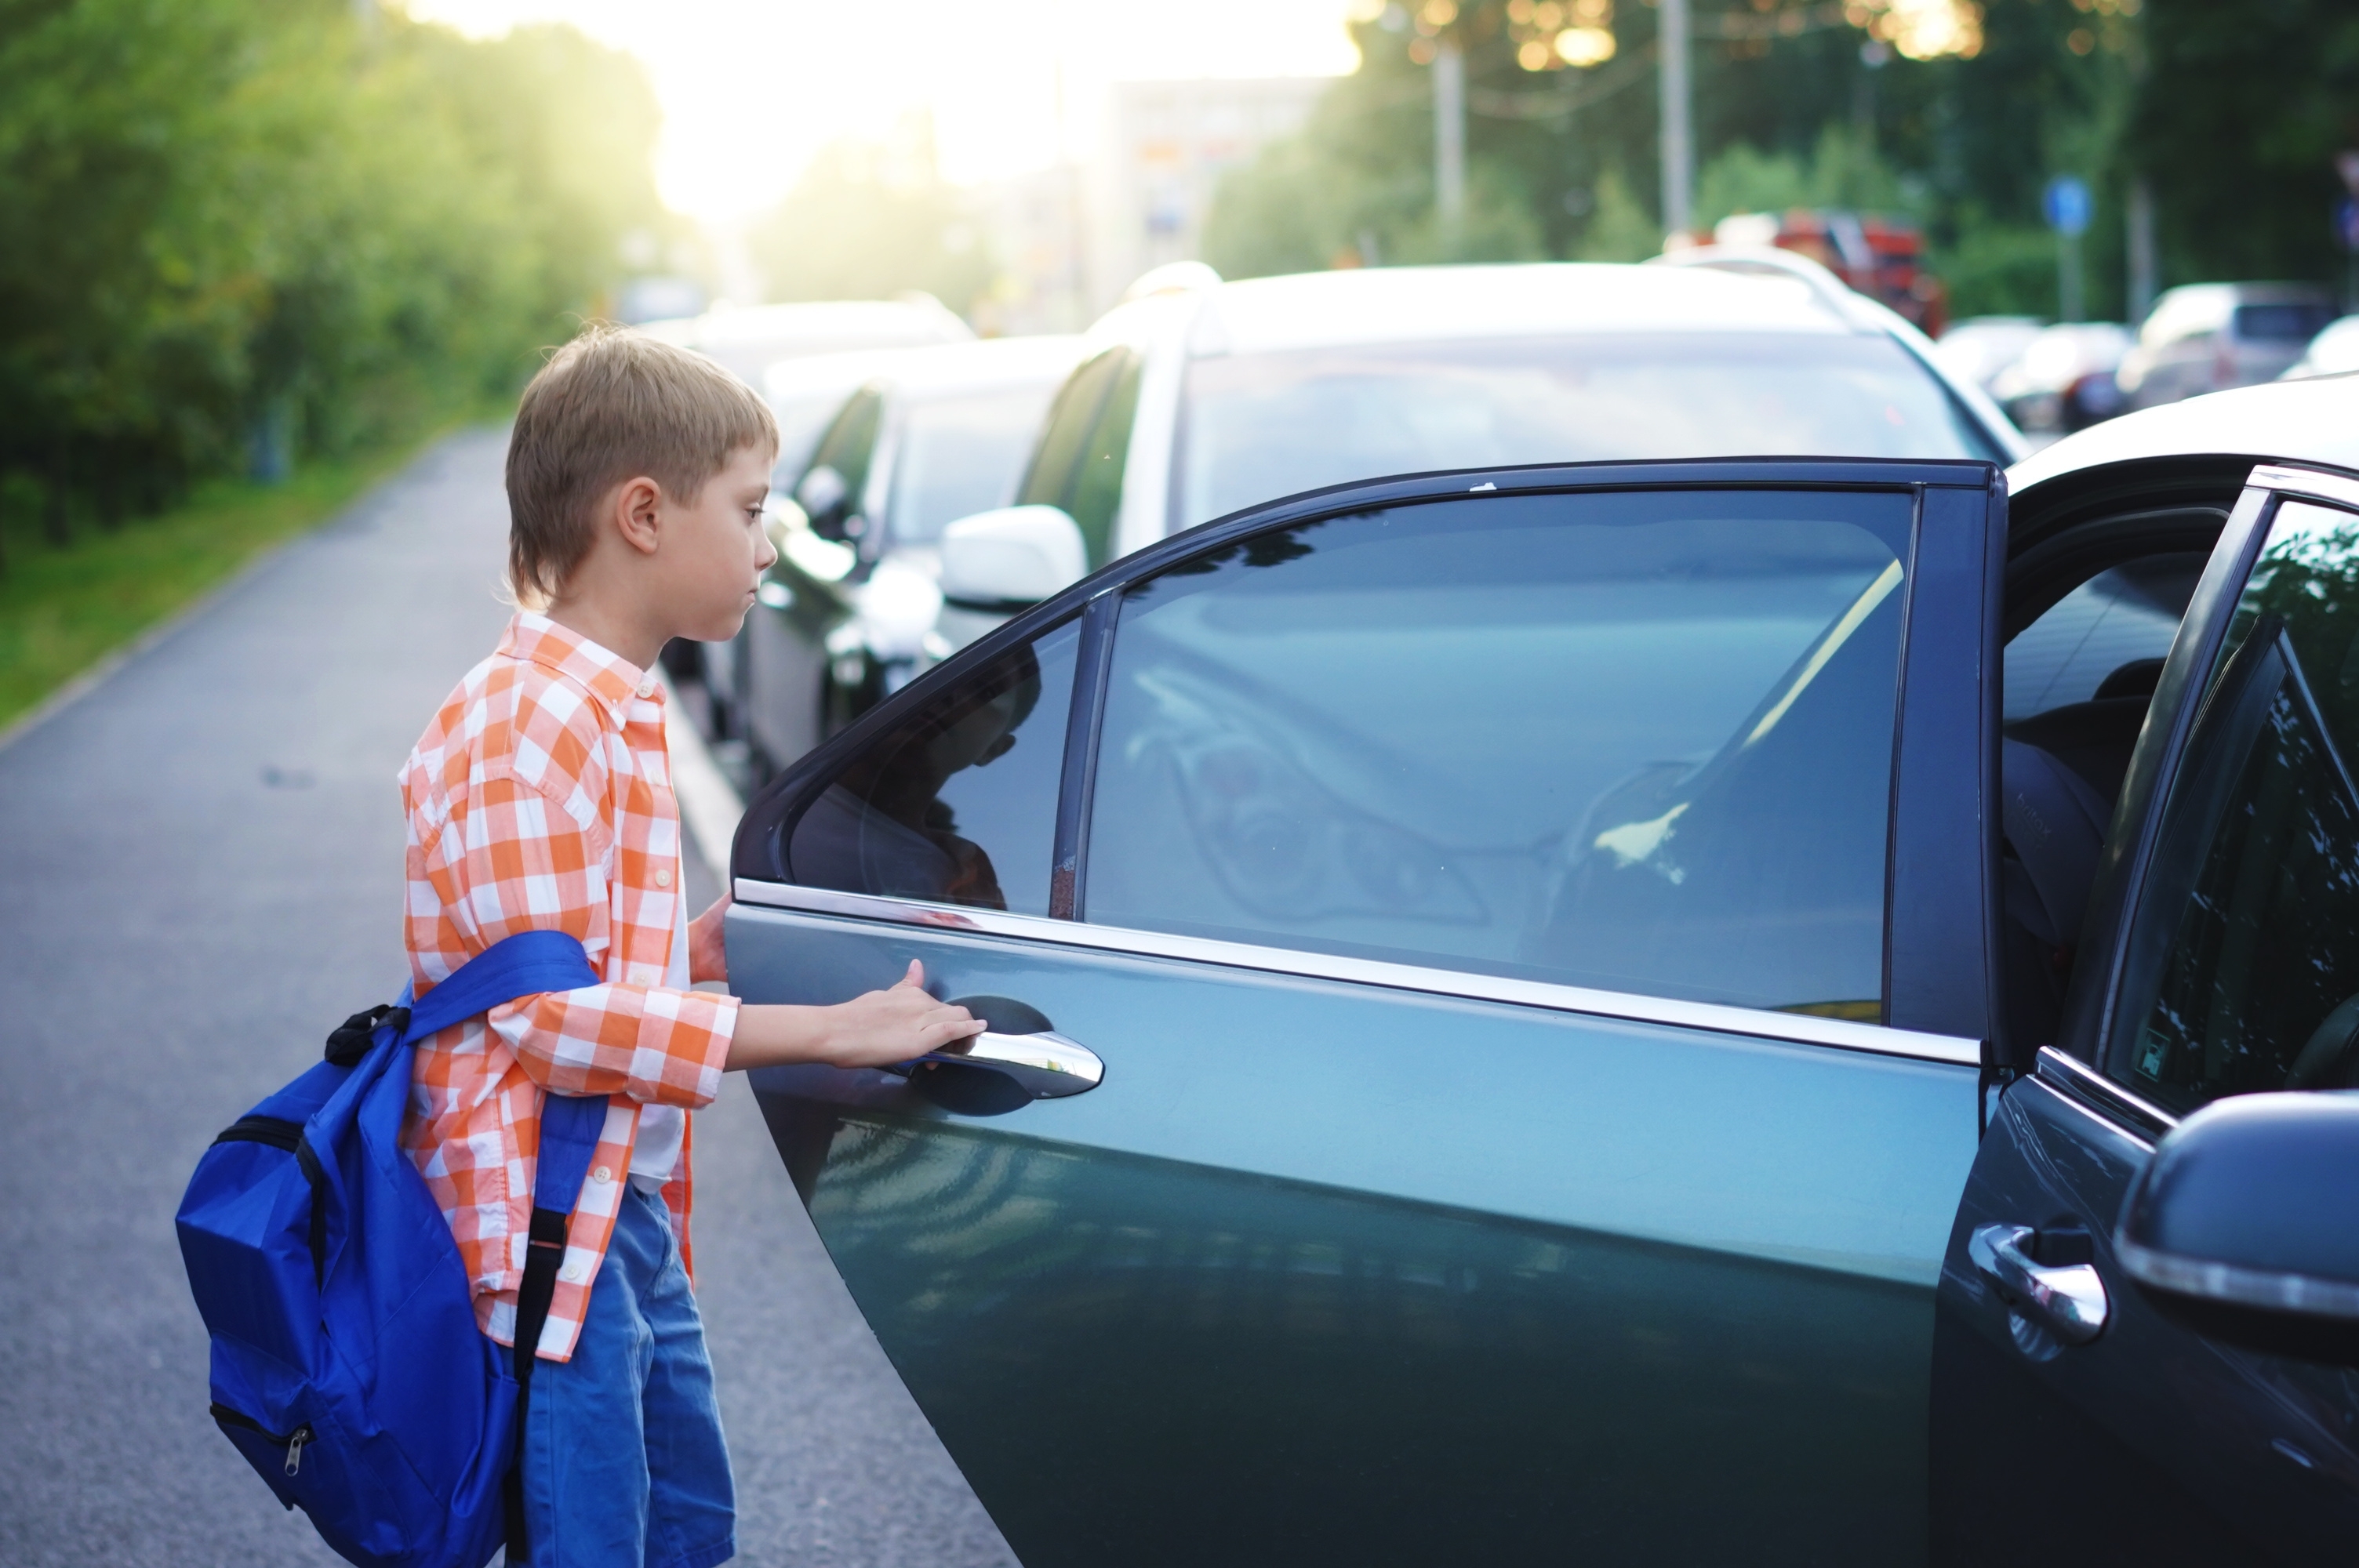 Young boy getting out of the car | Source: Shutterstock.com